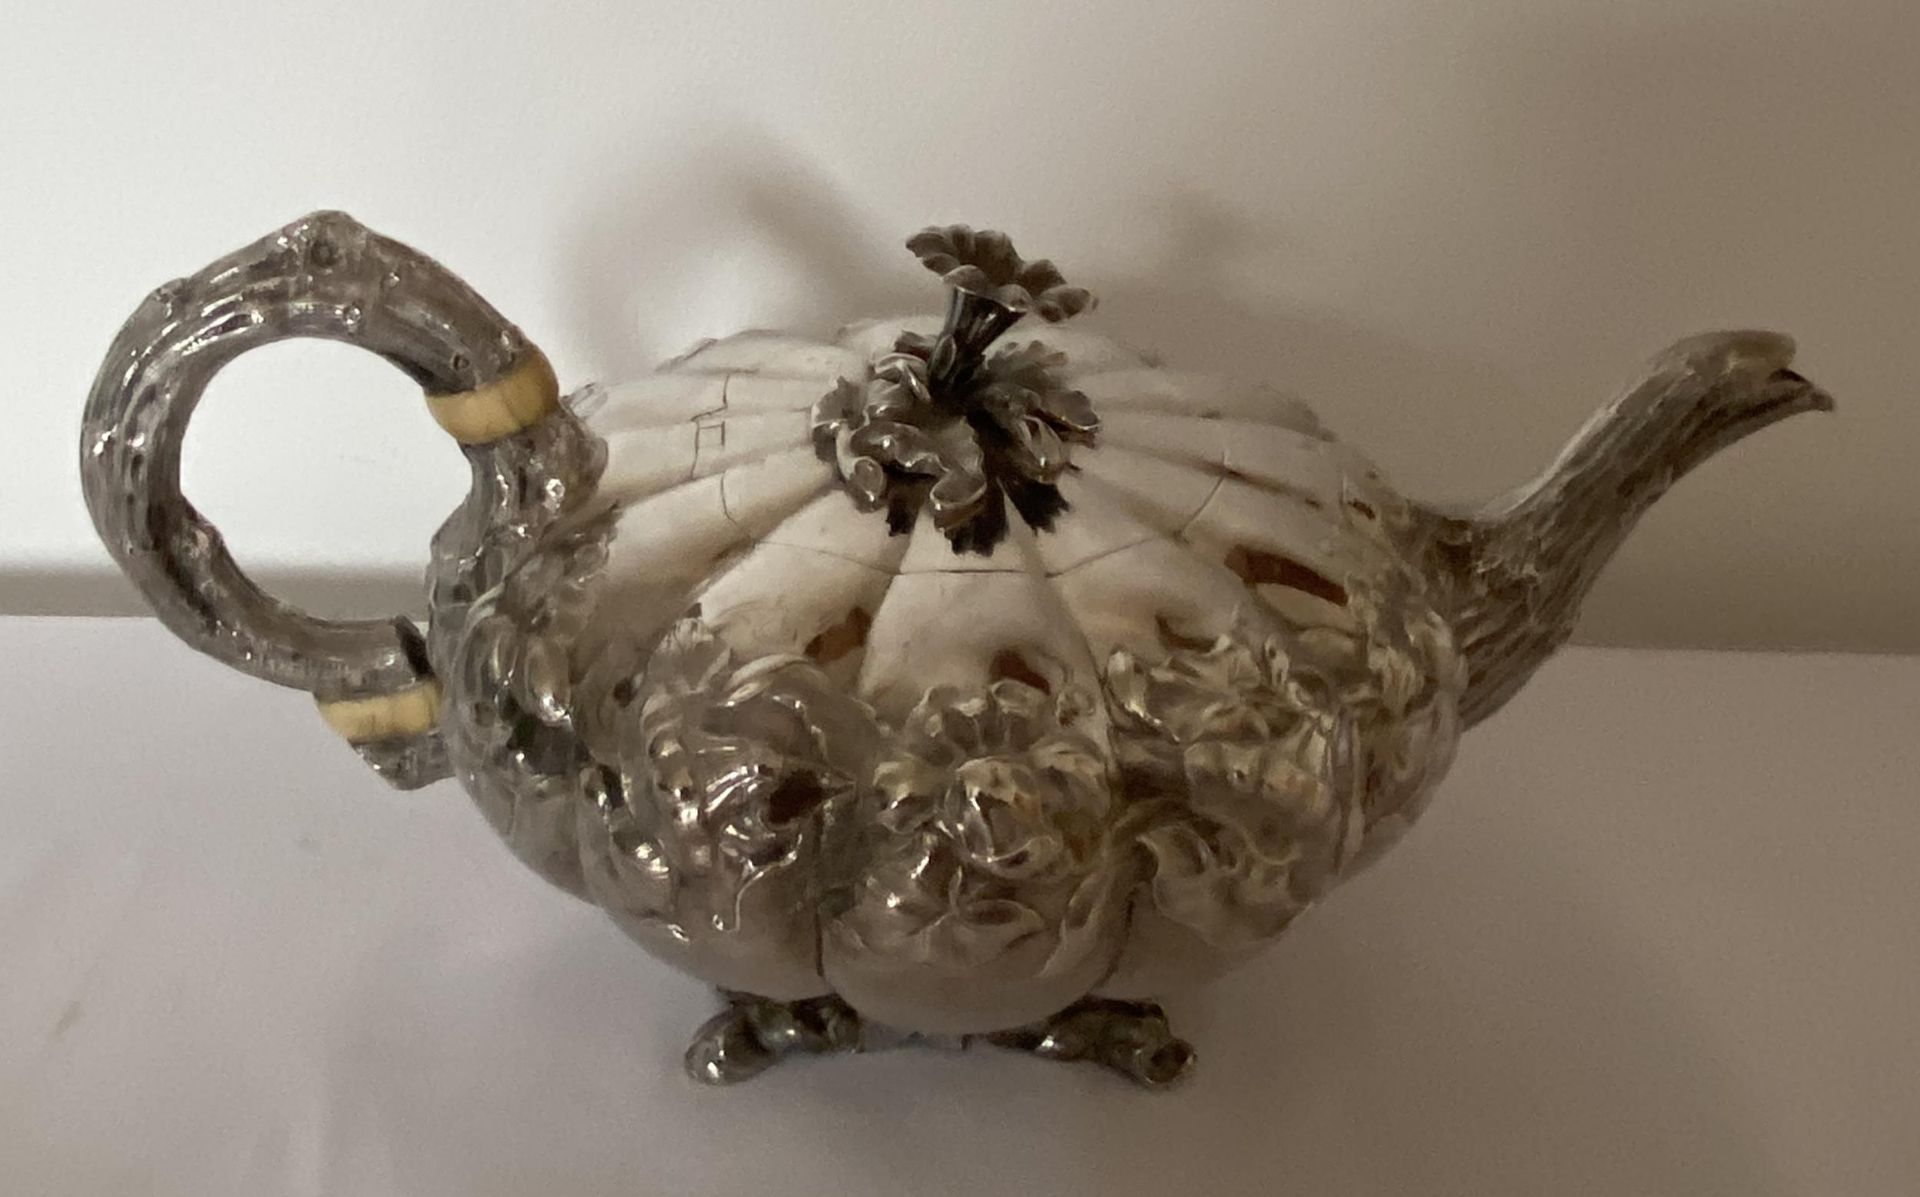 A VICTORIAN 1840 HALLMARKED LONDON SILVER TEAPOT, MAKER WC, POSSIBLY WILLIAM CHANDLESS, GROSS WEIGHT - Image 3 of 21